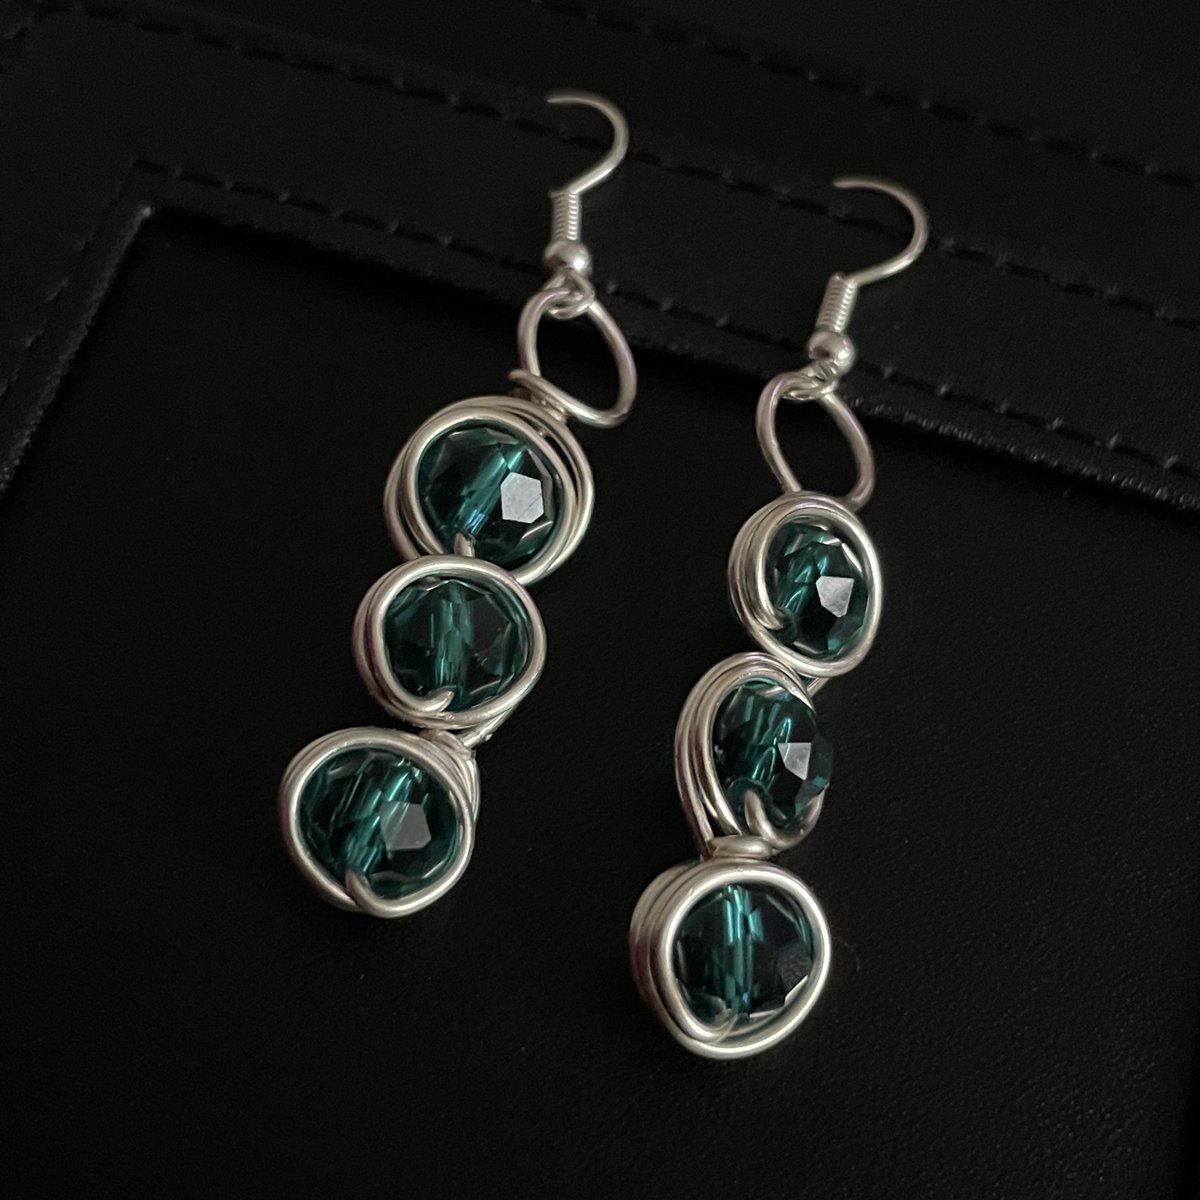 Silver plated copper wire and teal glass earrings #handmade #wirewrapped #tealearrings #teal #earrings #giftideas #shopsmall #shoplocal #giftideas #jewellery #nowavailable #folksywestmidlands #folksylocal #folksylocalmarkets